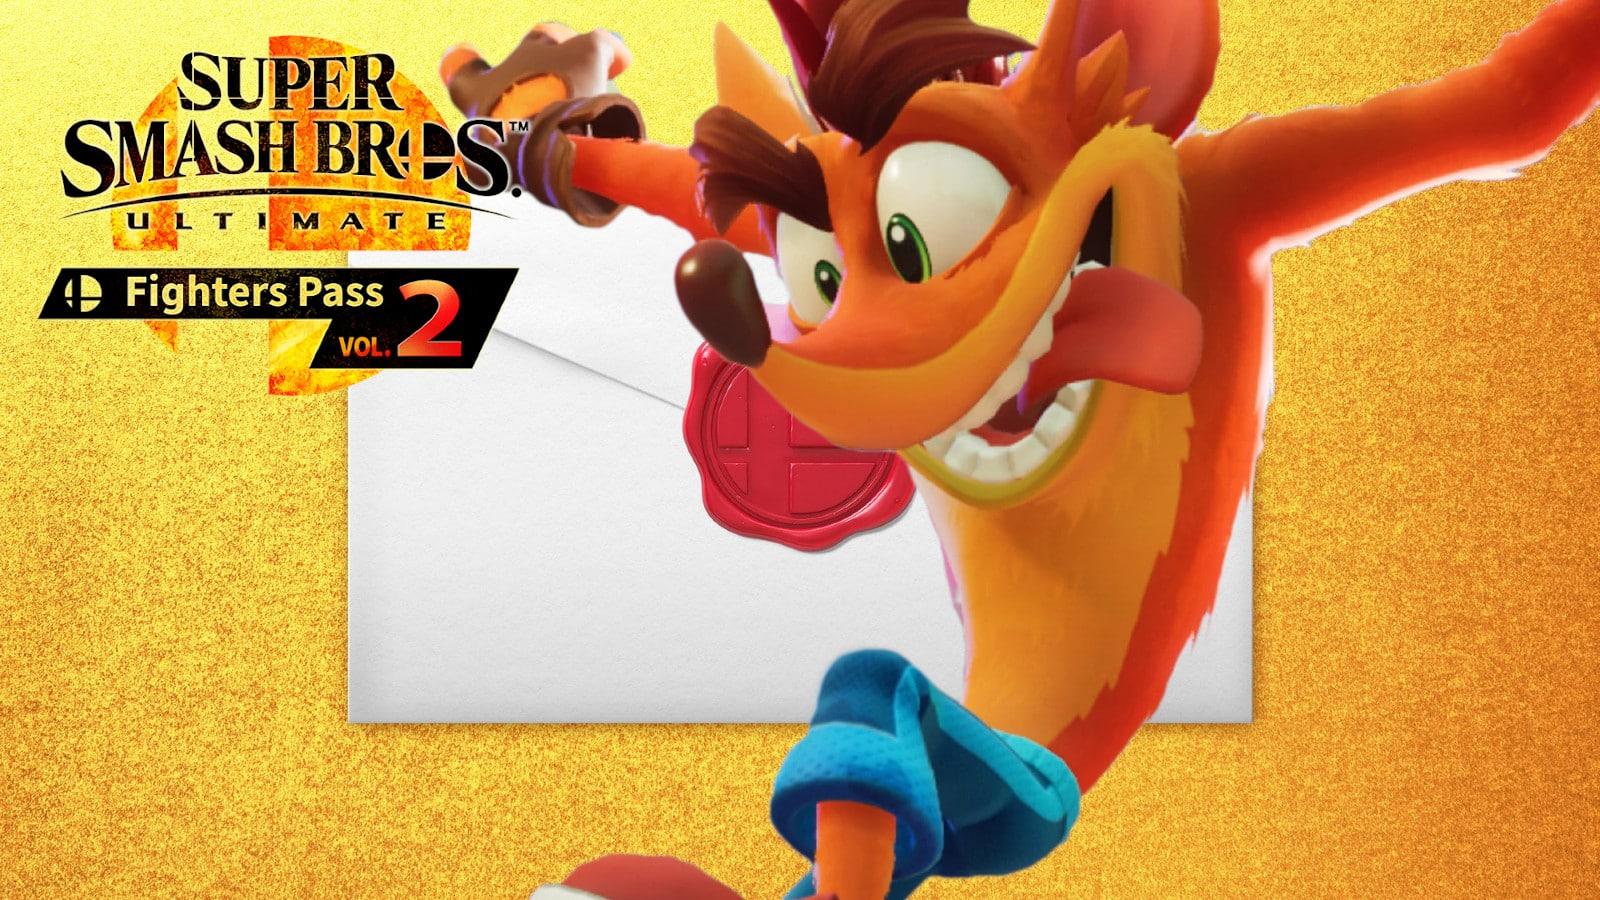 All the Crash Bandicoot content we could see in Super Smash Bros